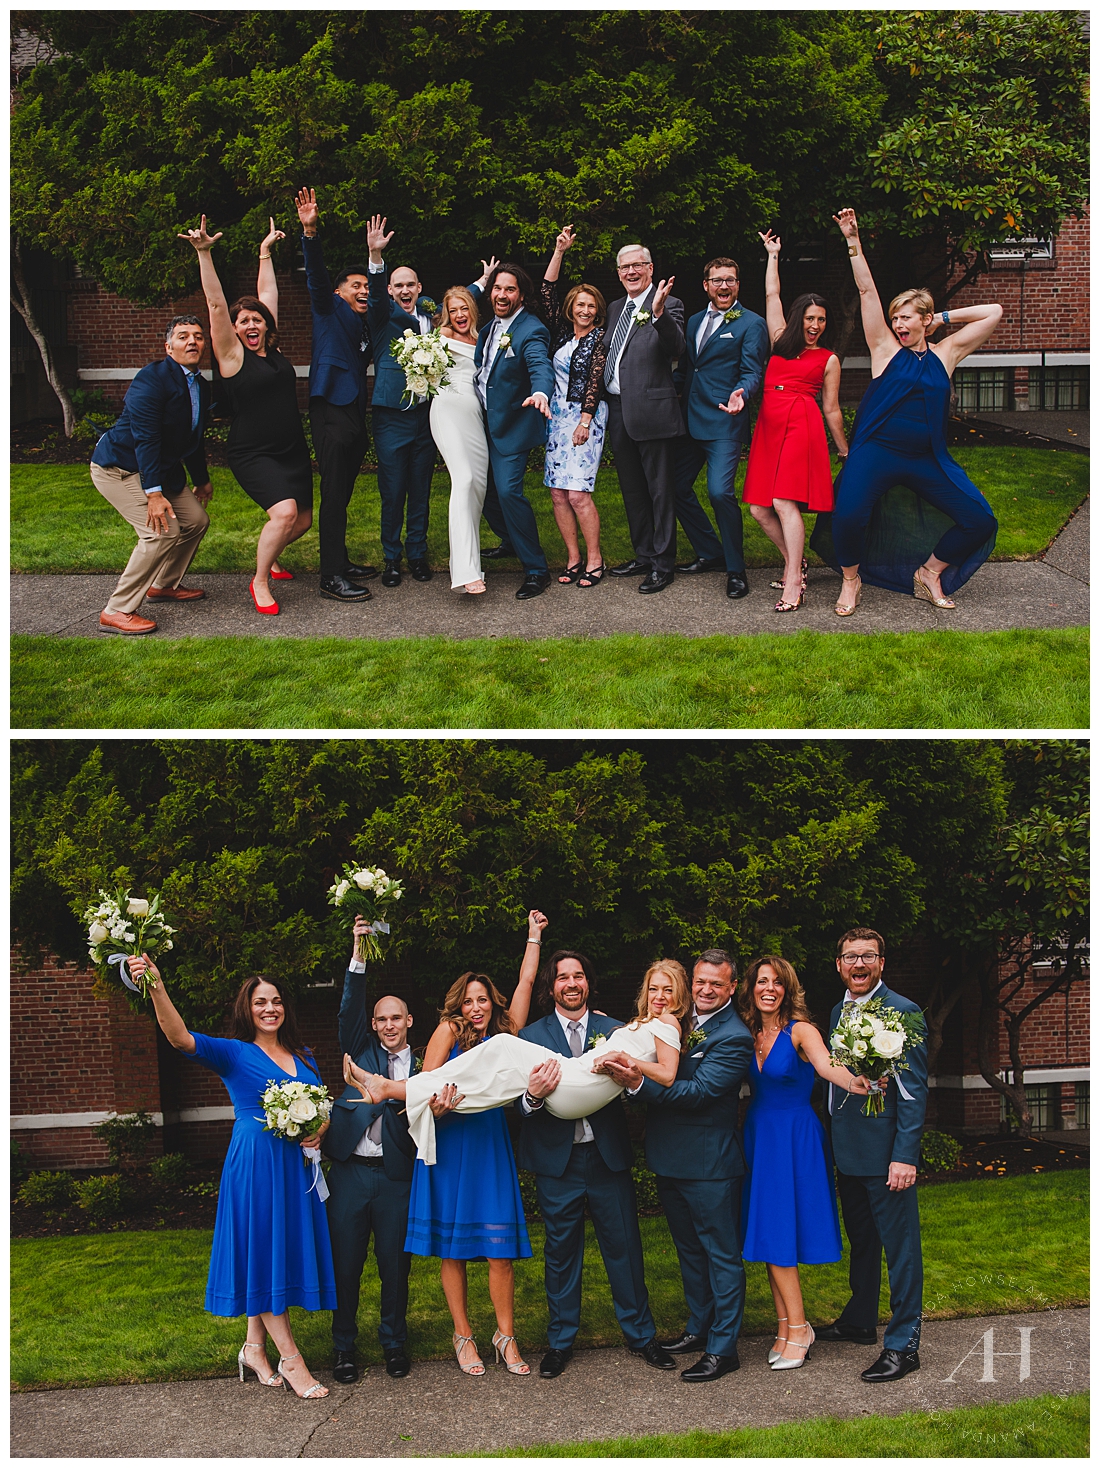 Fun Fall Group Wedding Shots with Bride and Groom | Casual and Carefree Wedding Party Photograph Ideas | Photographed by the Best Tacoma Wedding Photographer Amanda Howse Photography